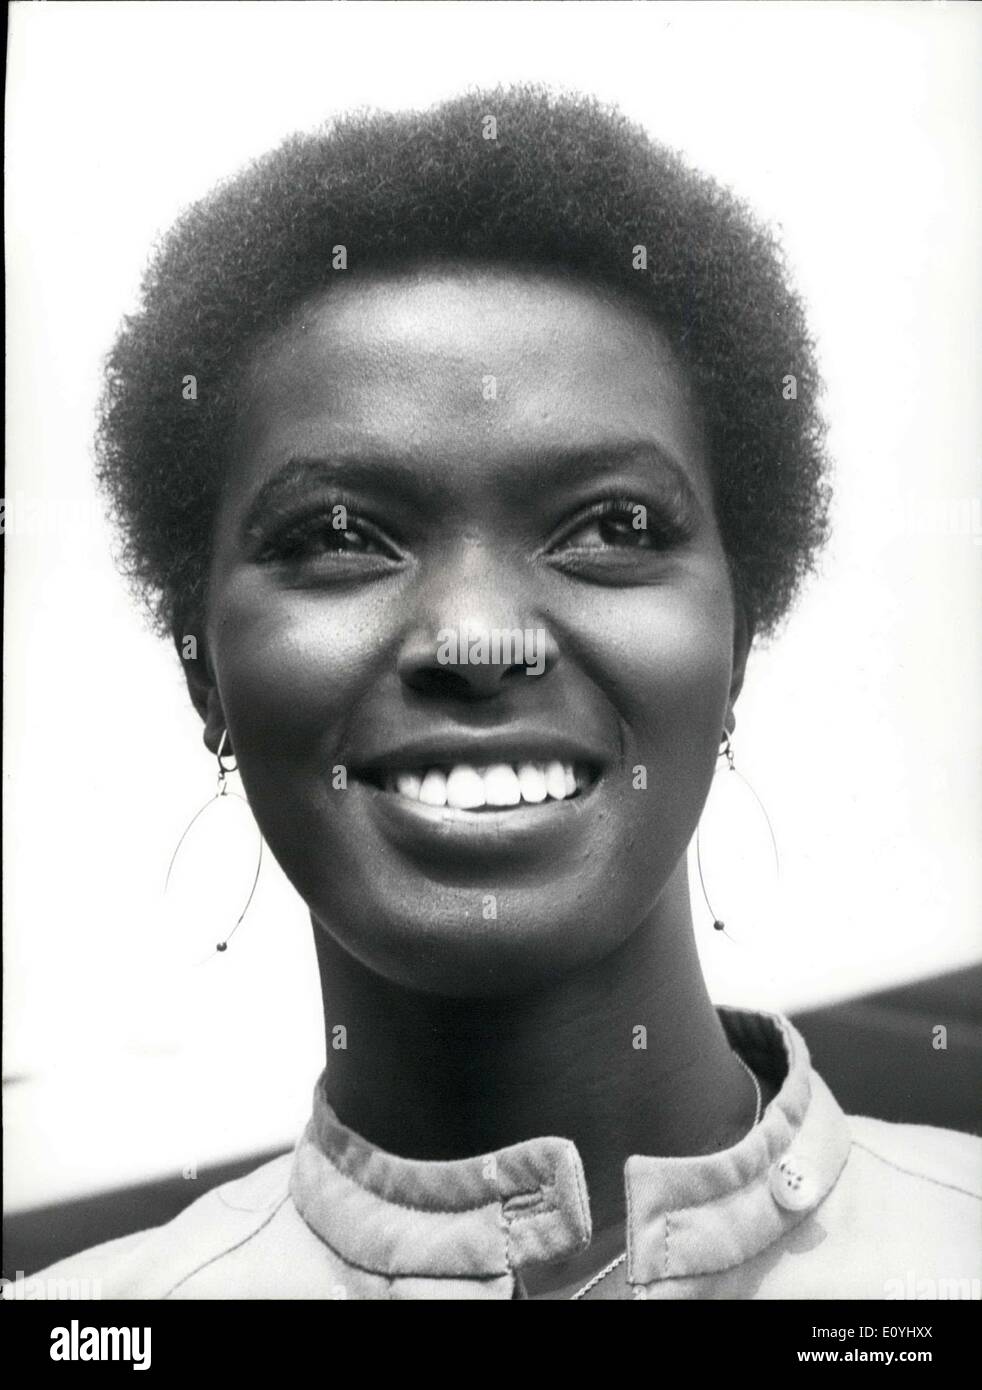 Jun. 10, 1970 - Gloria Smith (pictured), who won the title of Miss Black America in New York City, came to Paris. The 24 year old beauty queen has the following measurements: chest, 85cm; waist, 35cm; hips, 85cm. She is a model in the USA. Stock Photo